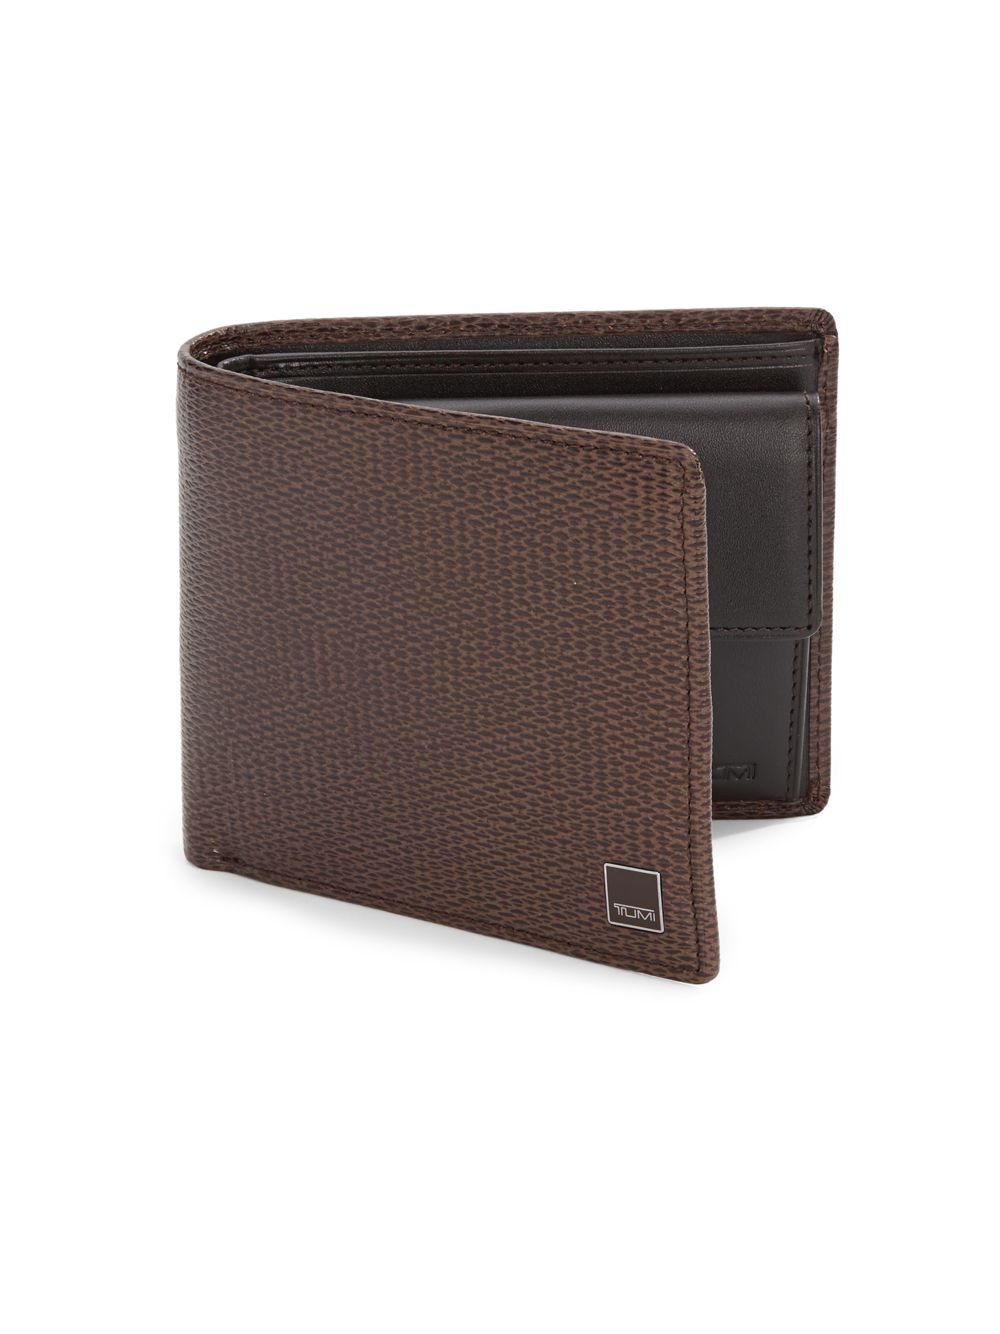 Tumi Bifold Wallet Wallets For Men For Sale | IUCN Water